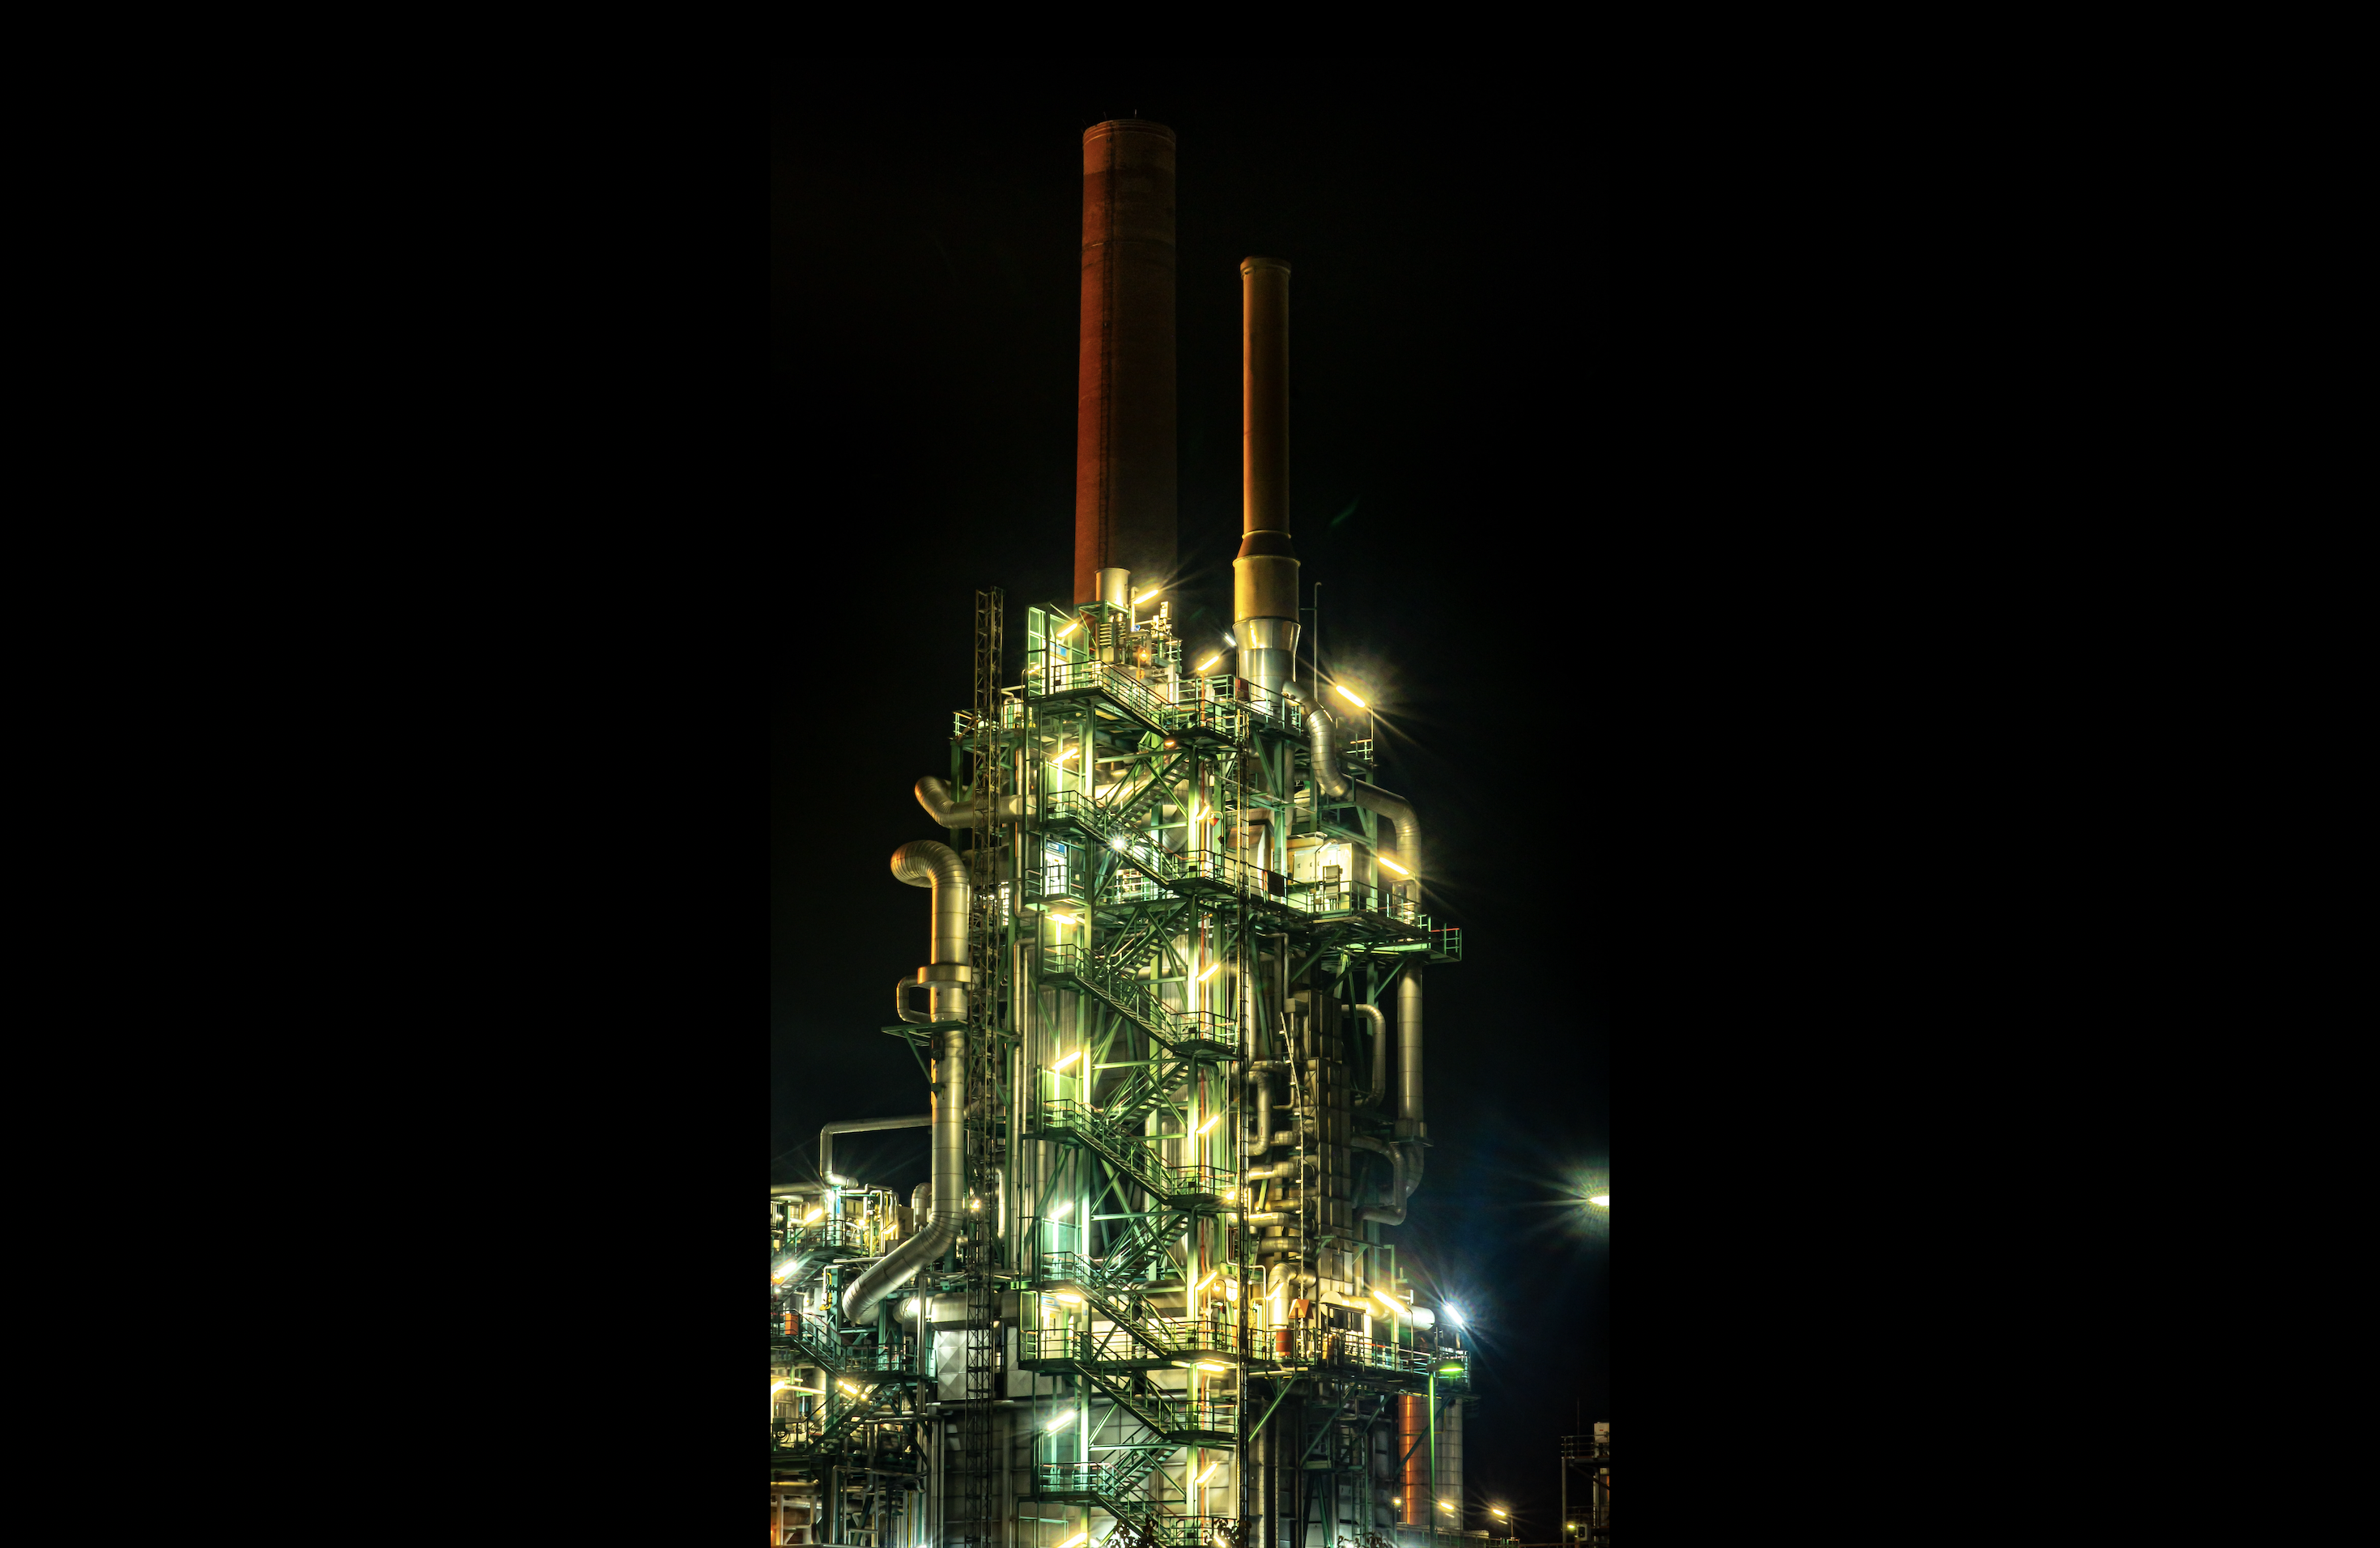 Chemical plant image